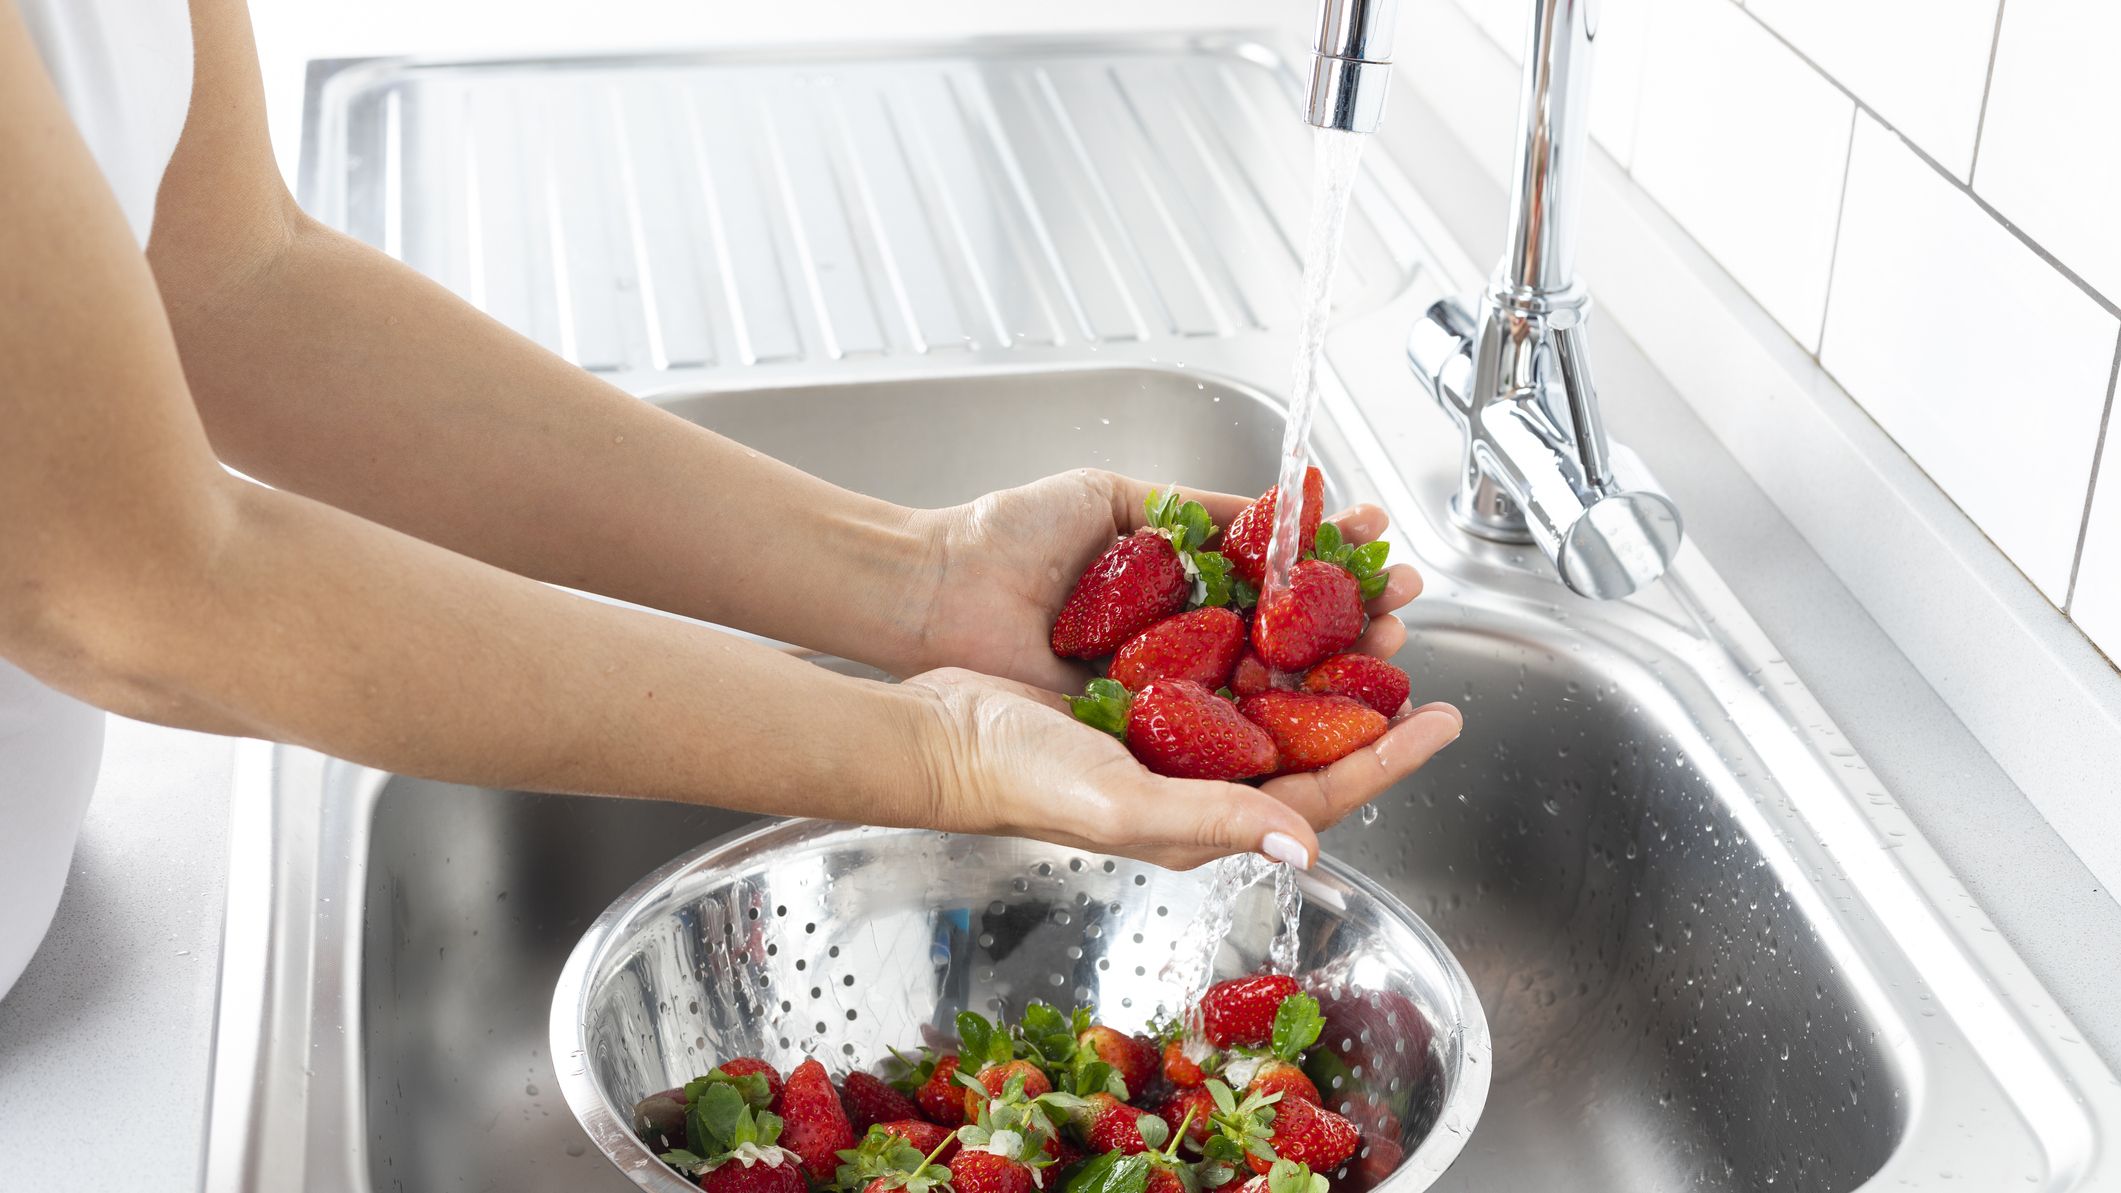 https://hips.hearstapps.com/hmg-prod/images/how-to-wash-strawberries-1651680896.jpg?crop=1xw:0.84375xh;center,top